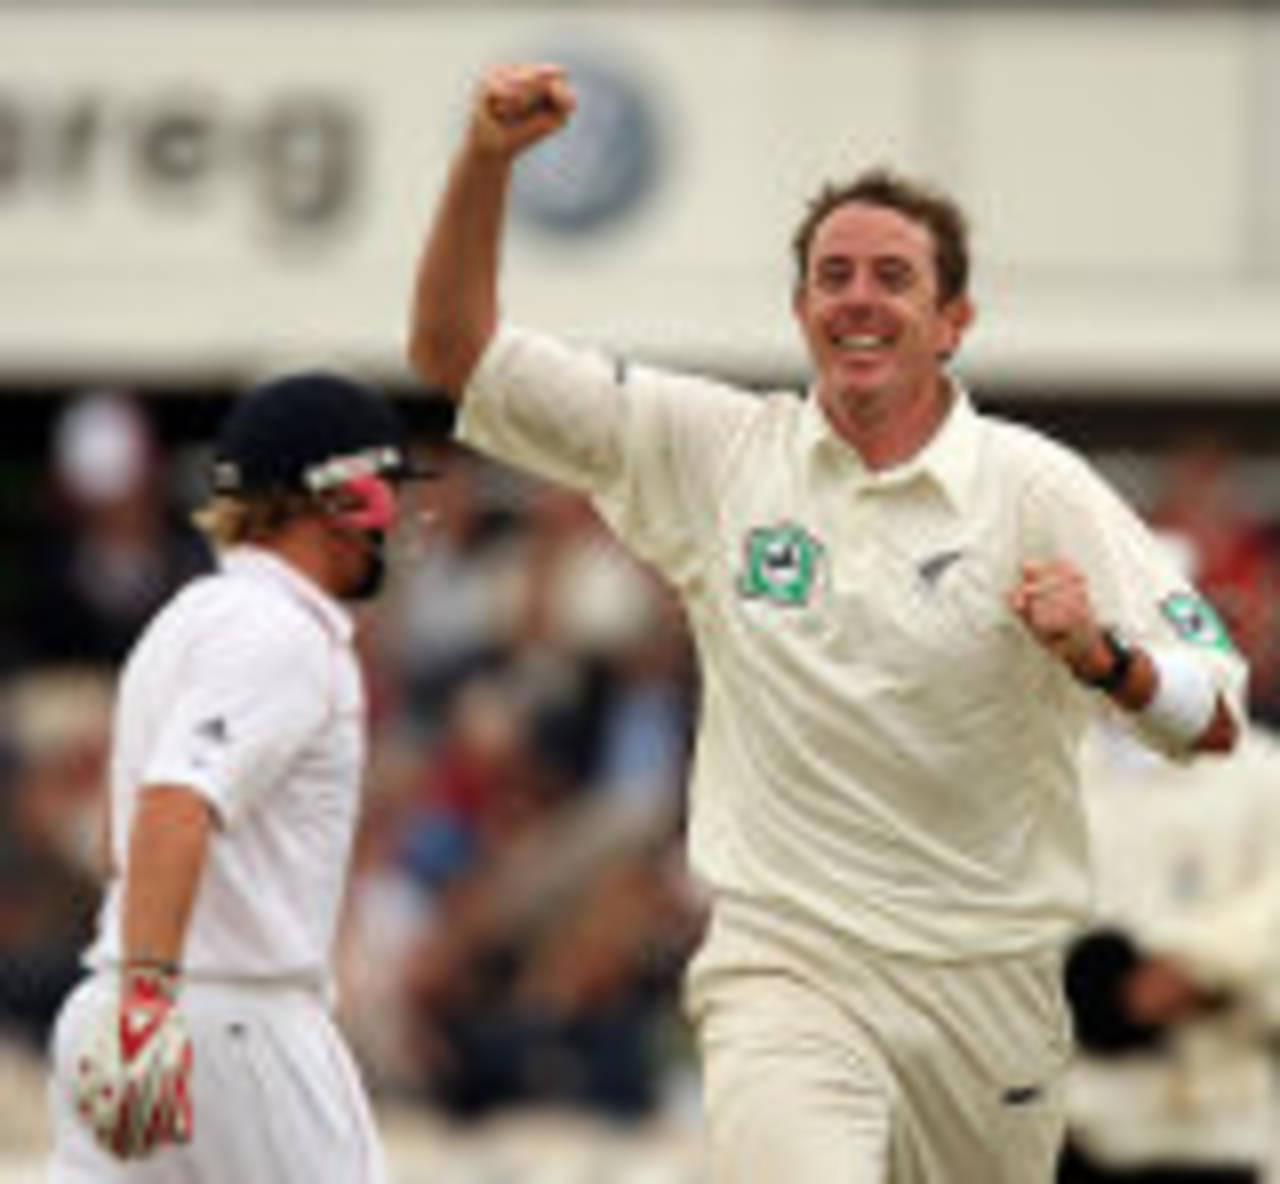 Iain O'Brien celebrates the wicket of Ian Bell as England struggled, England v New Zealand, 2nd Test, Old Trafford, May 25, 2008